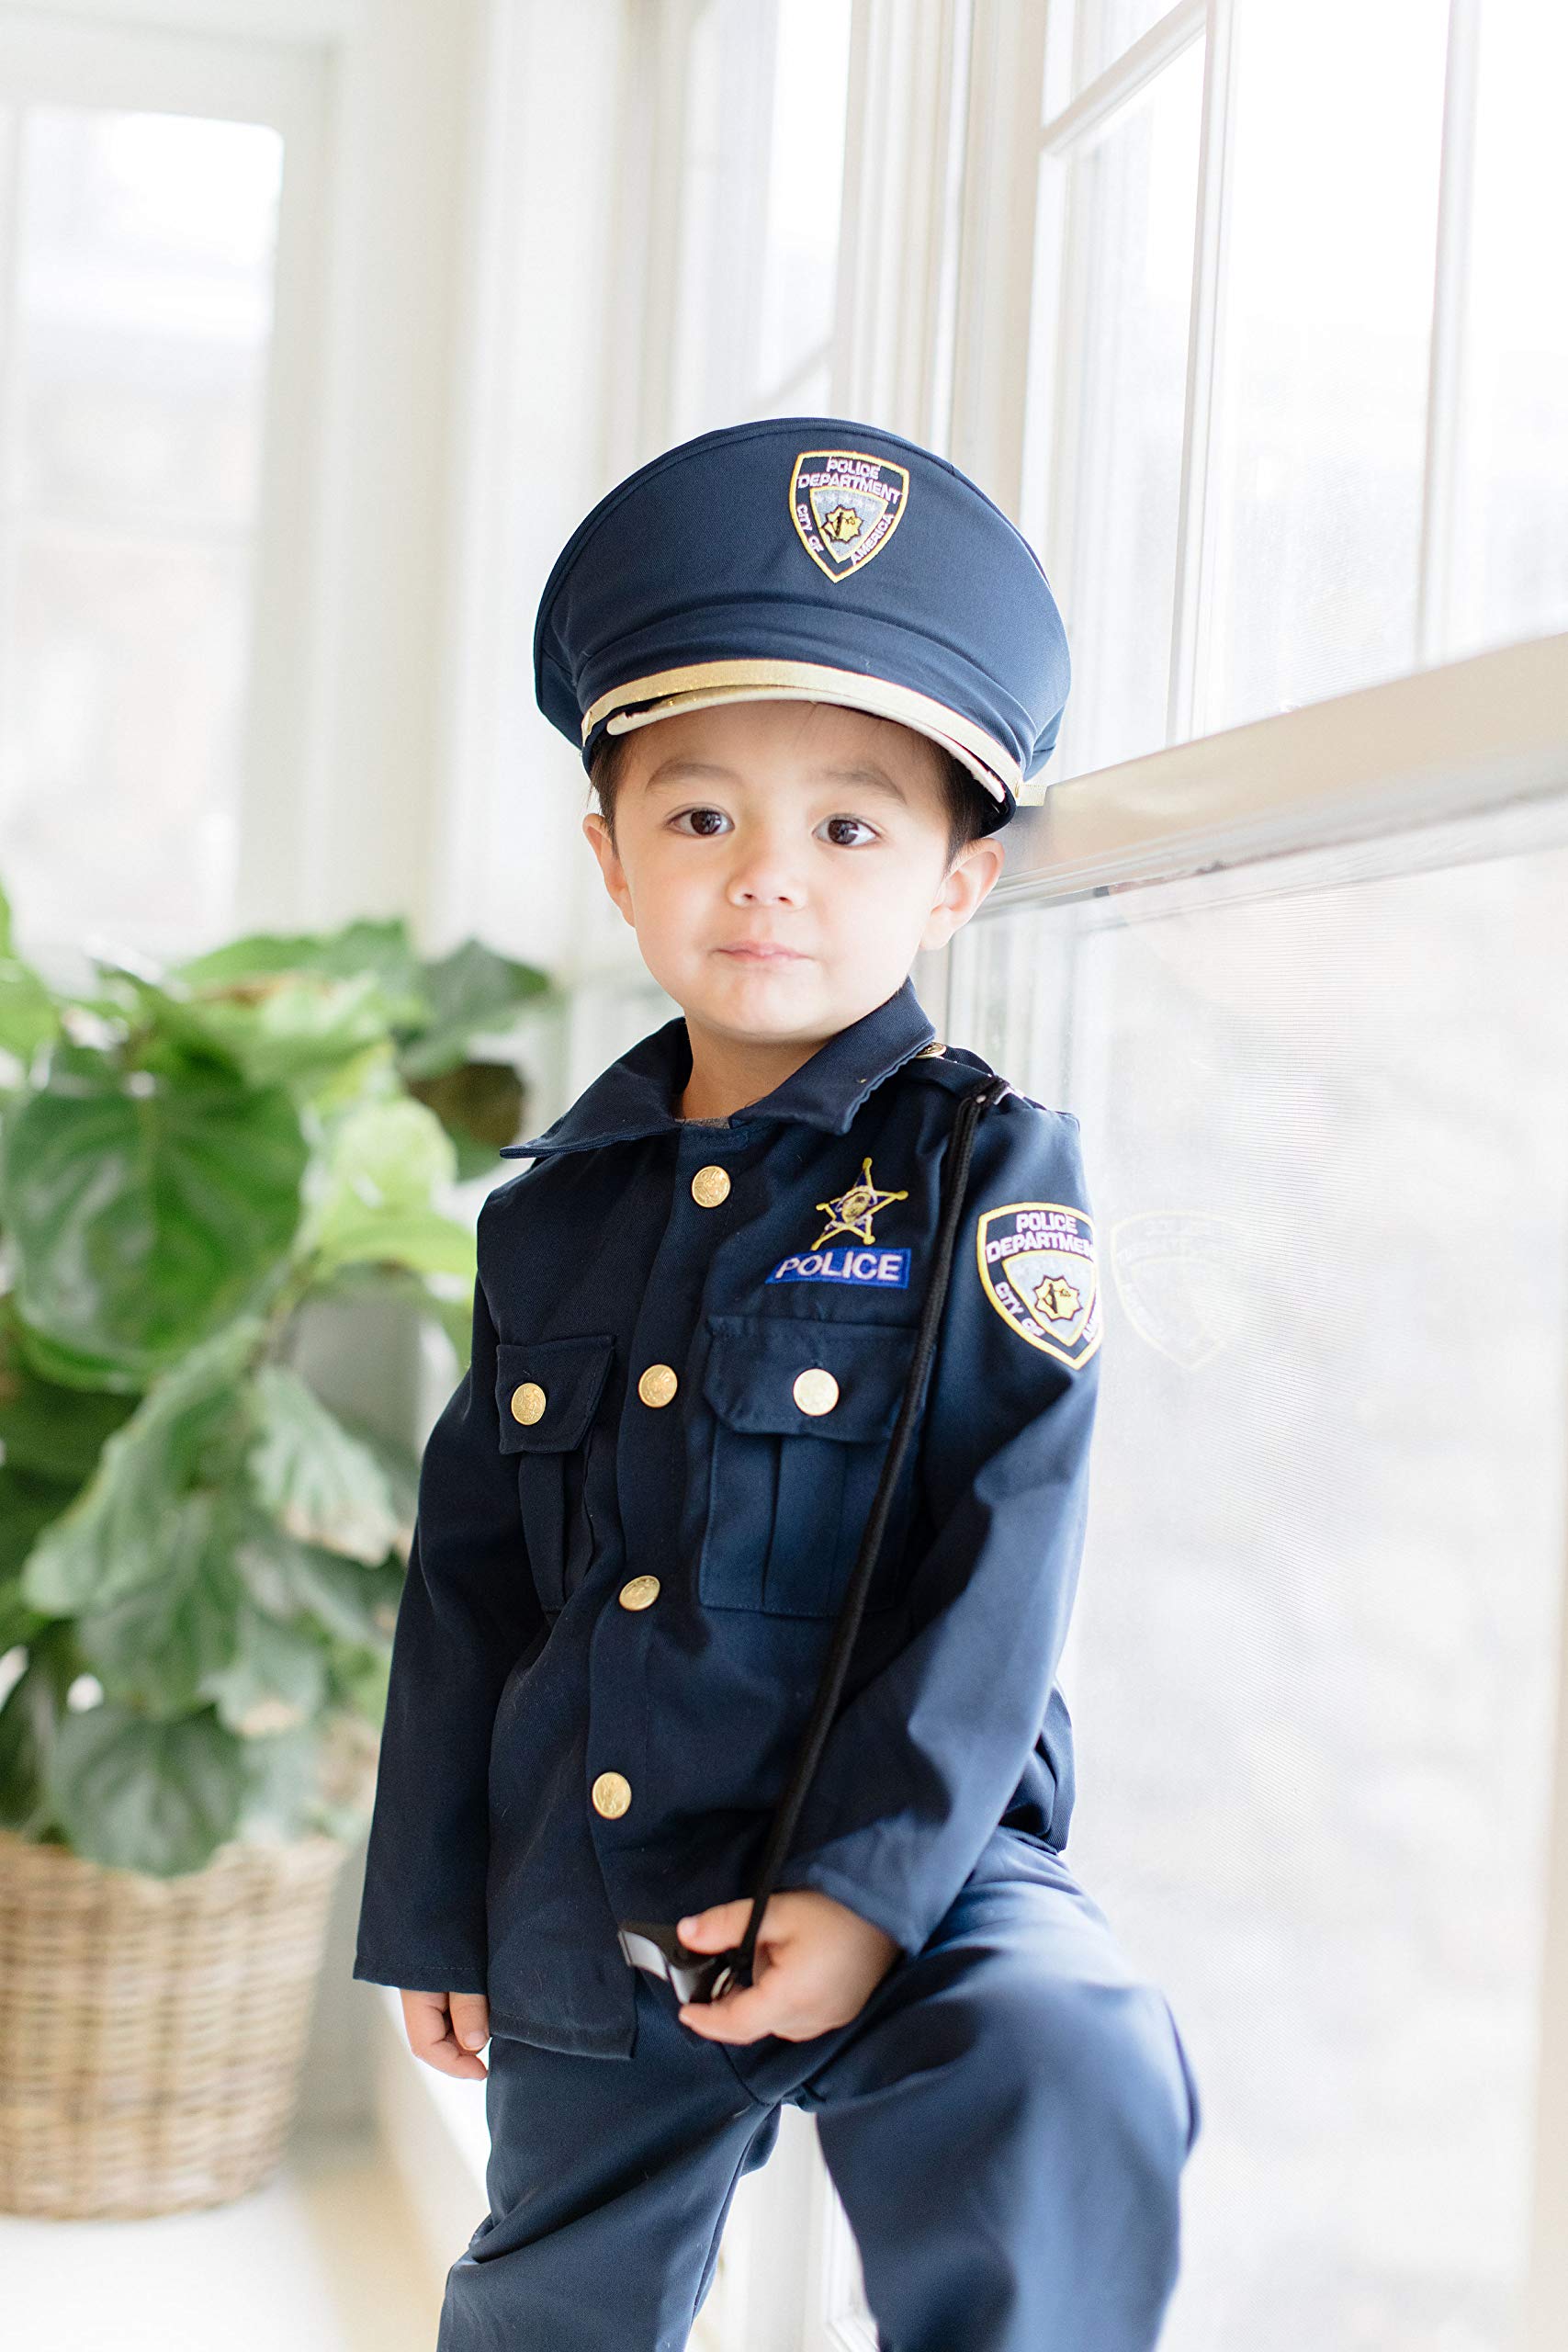 Dress Up America Police Costume For Boys - Cop Uniform Costume for Kids - Includes: Shirt, Pants, Hat and Accessories